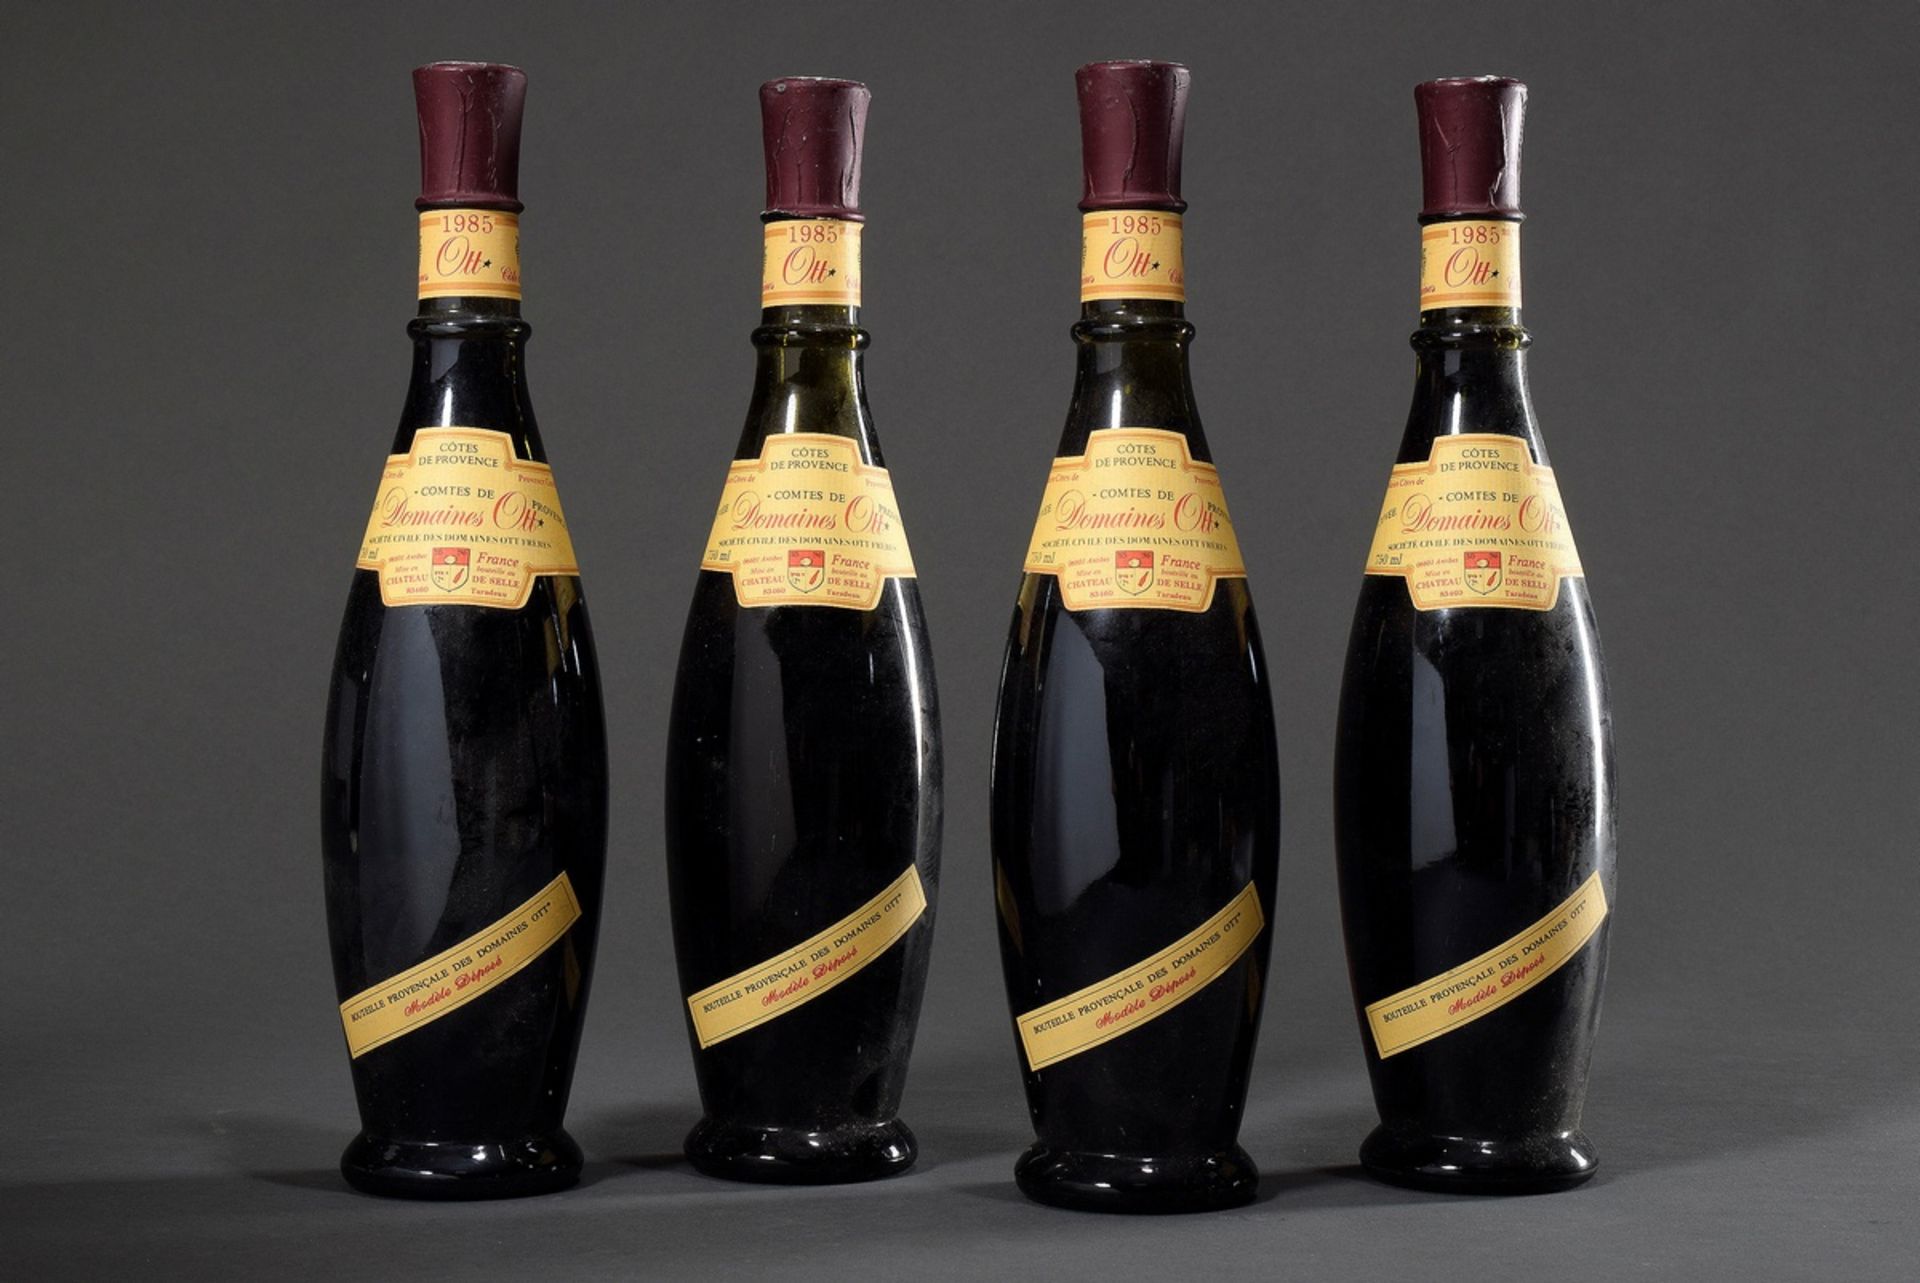 4 bottles 1985 red wine "Domaines Ott, Bandol", Provence, top shoulder, 0,75l, contains sulfites